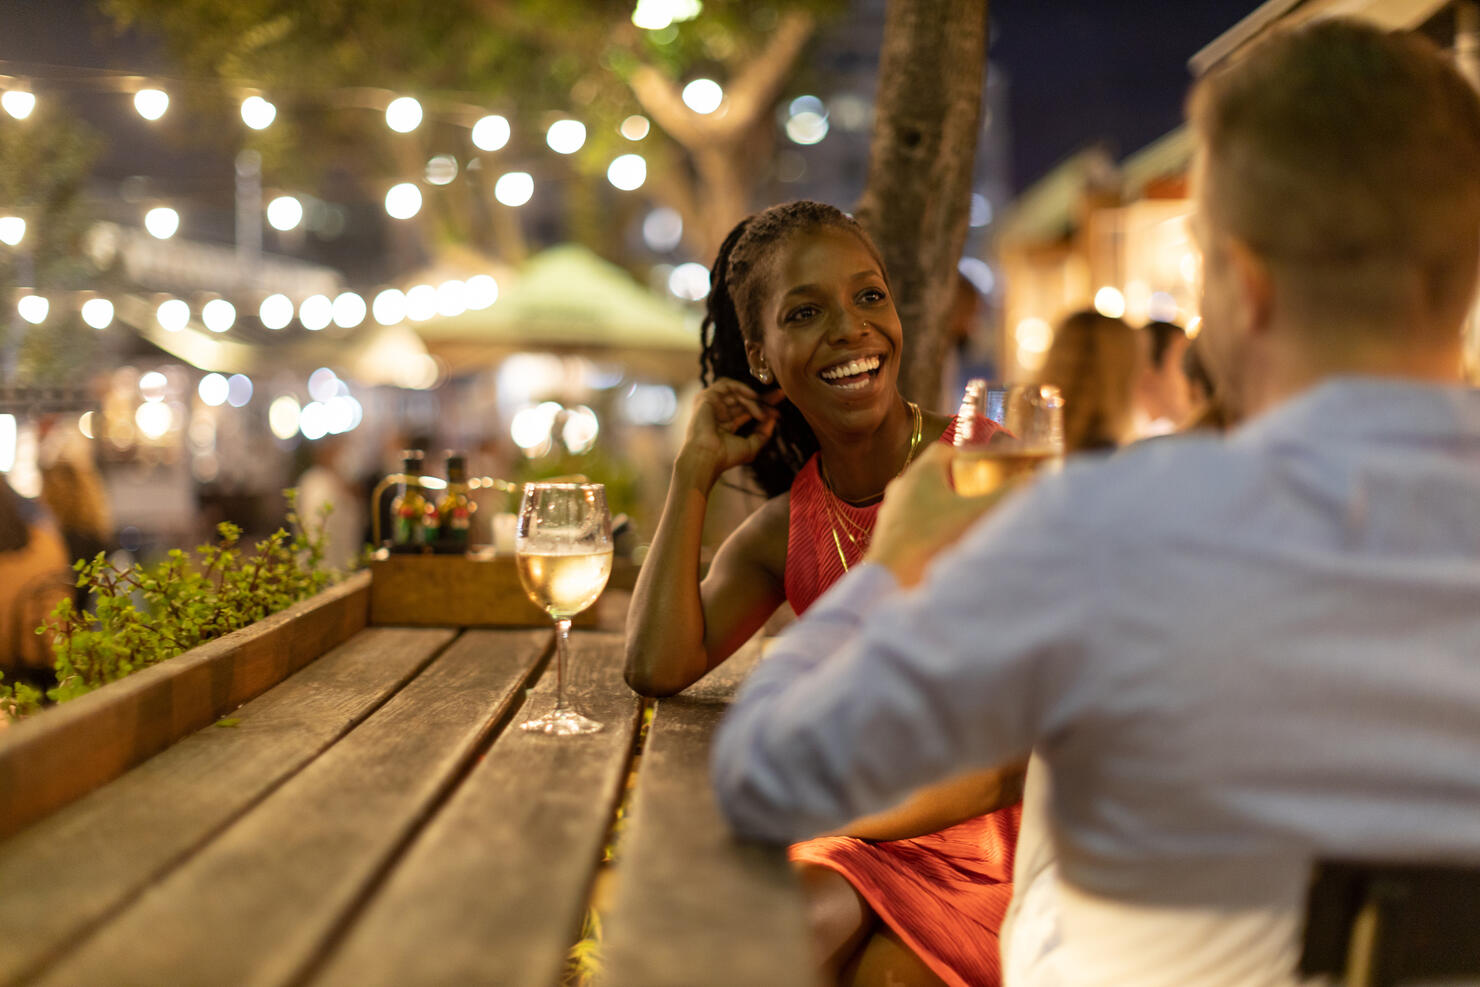 Couple drinking wine together outdoors at night